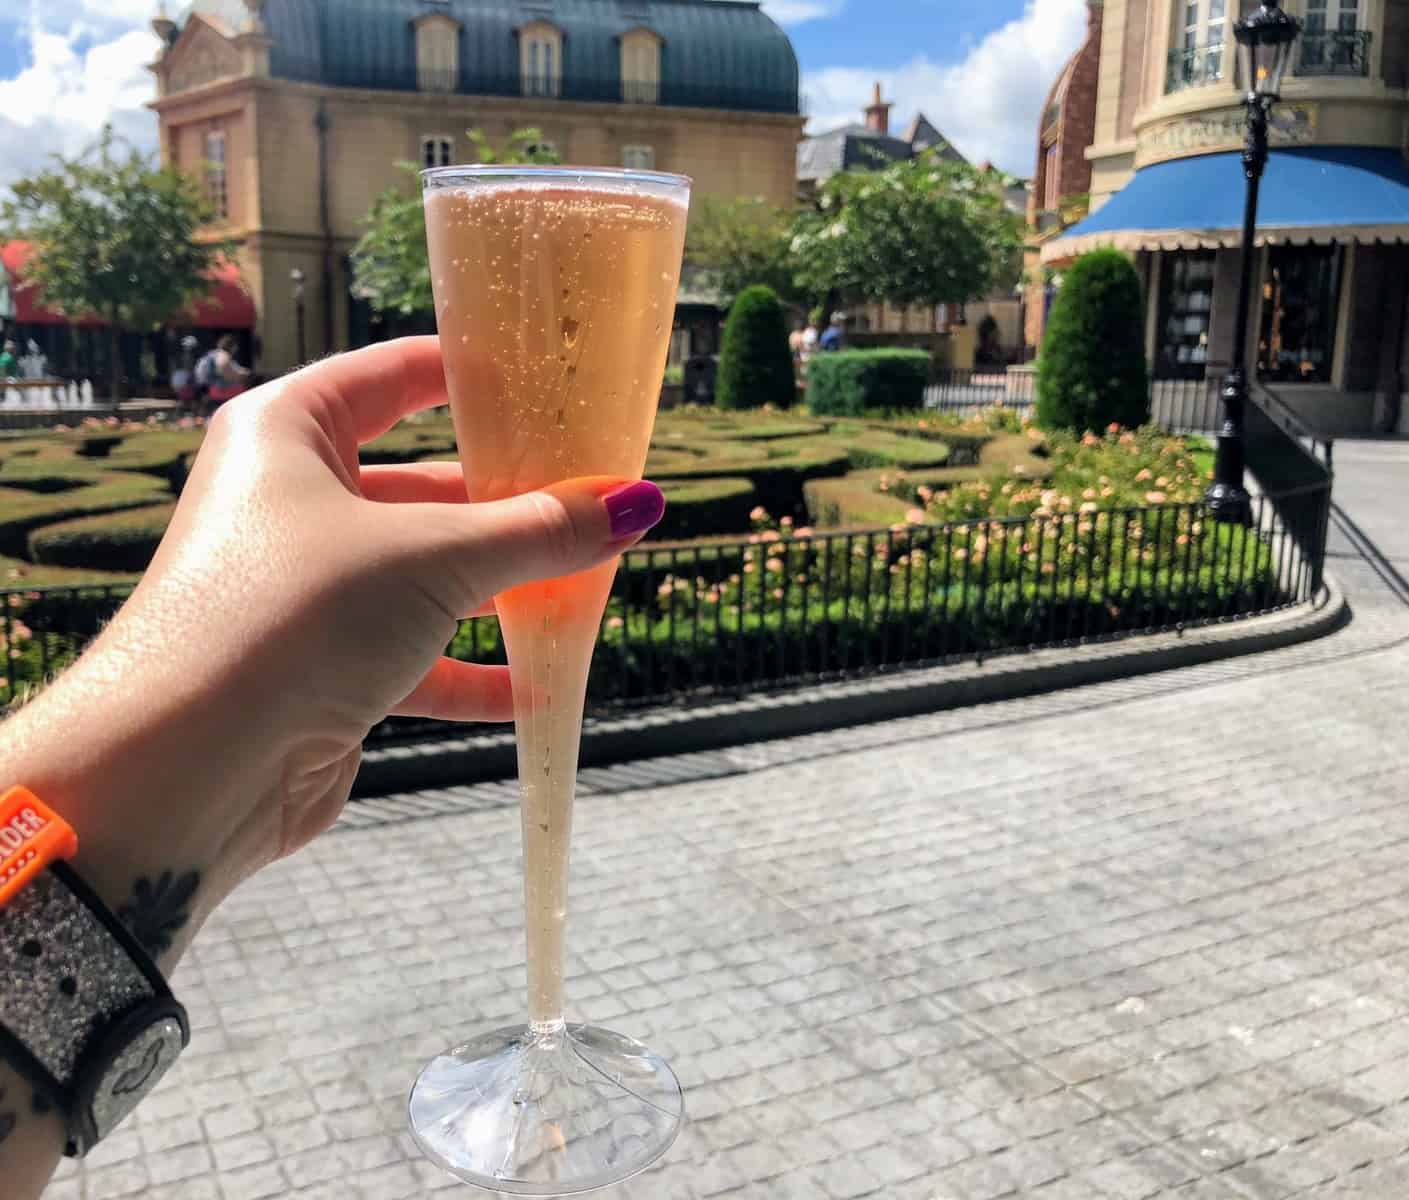 2023 Epcot International Food and Wine Festival Dates Announced